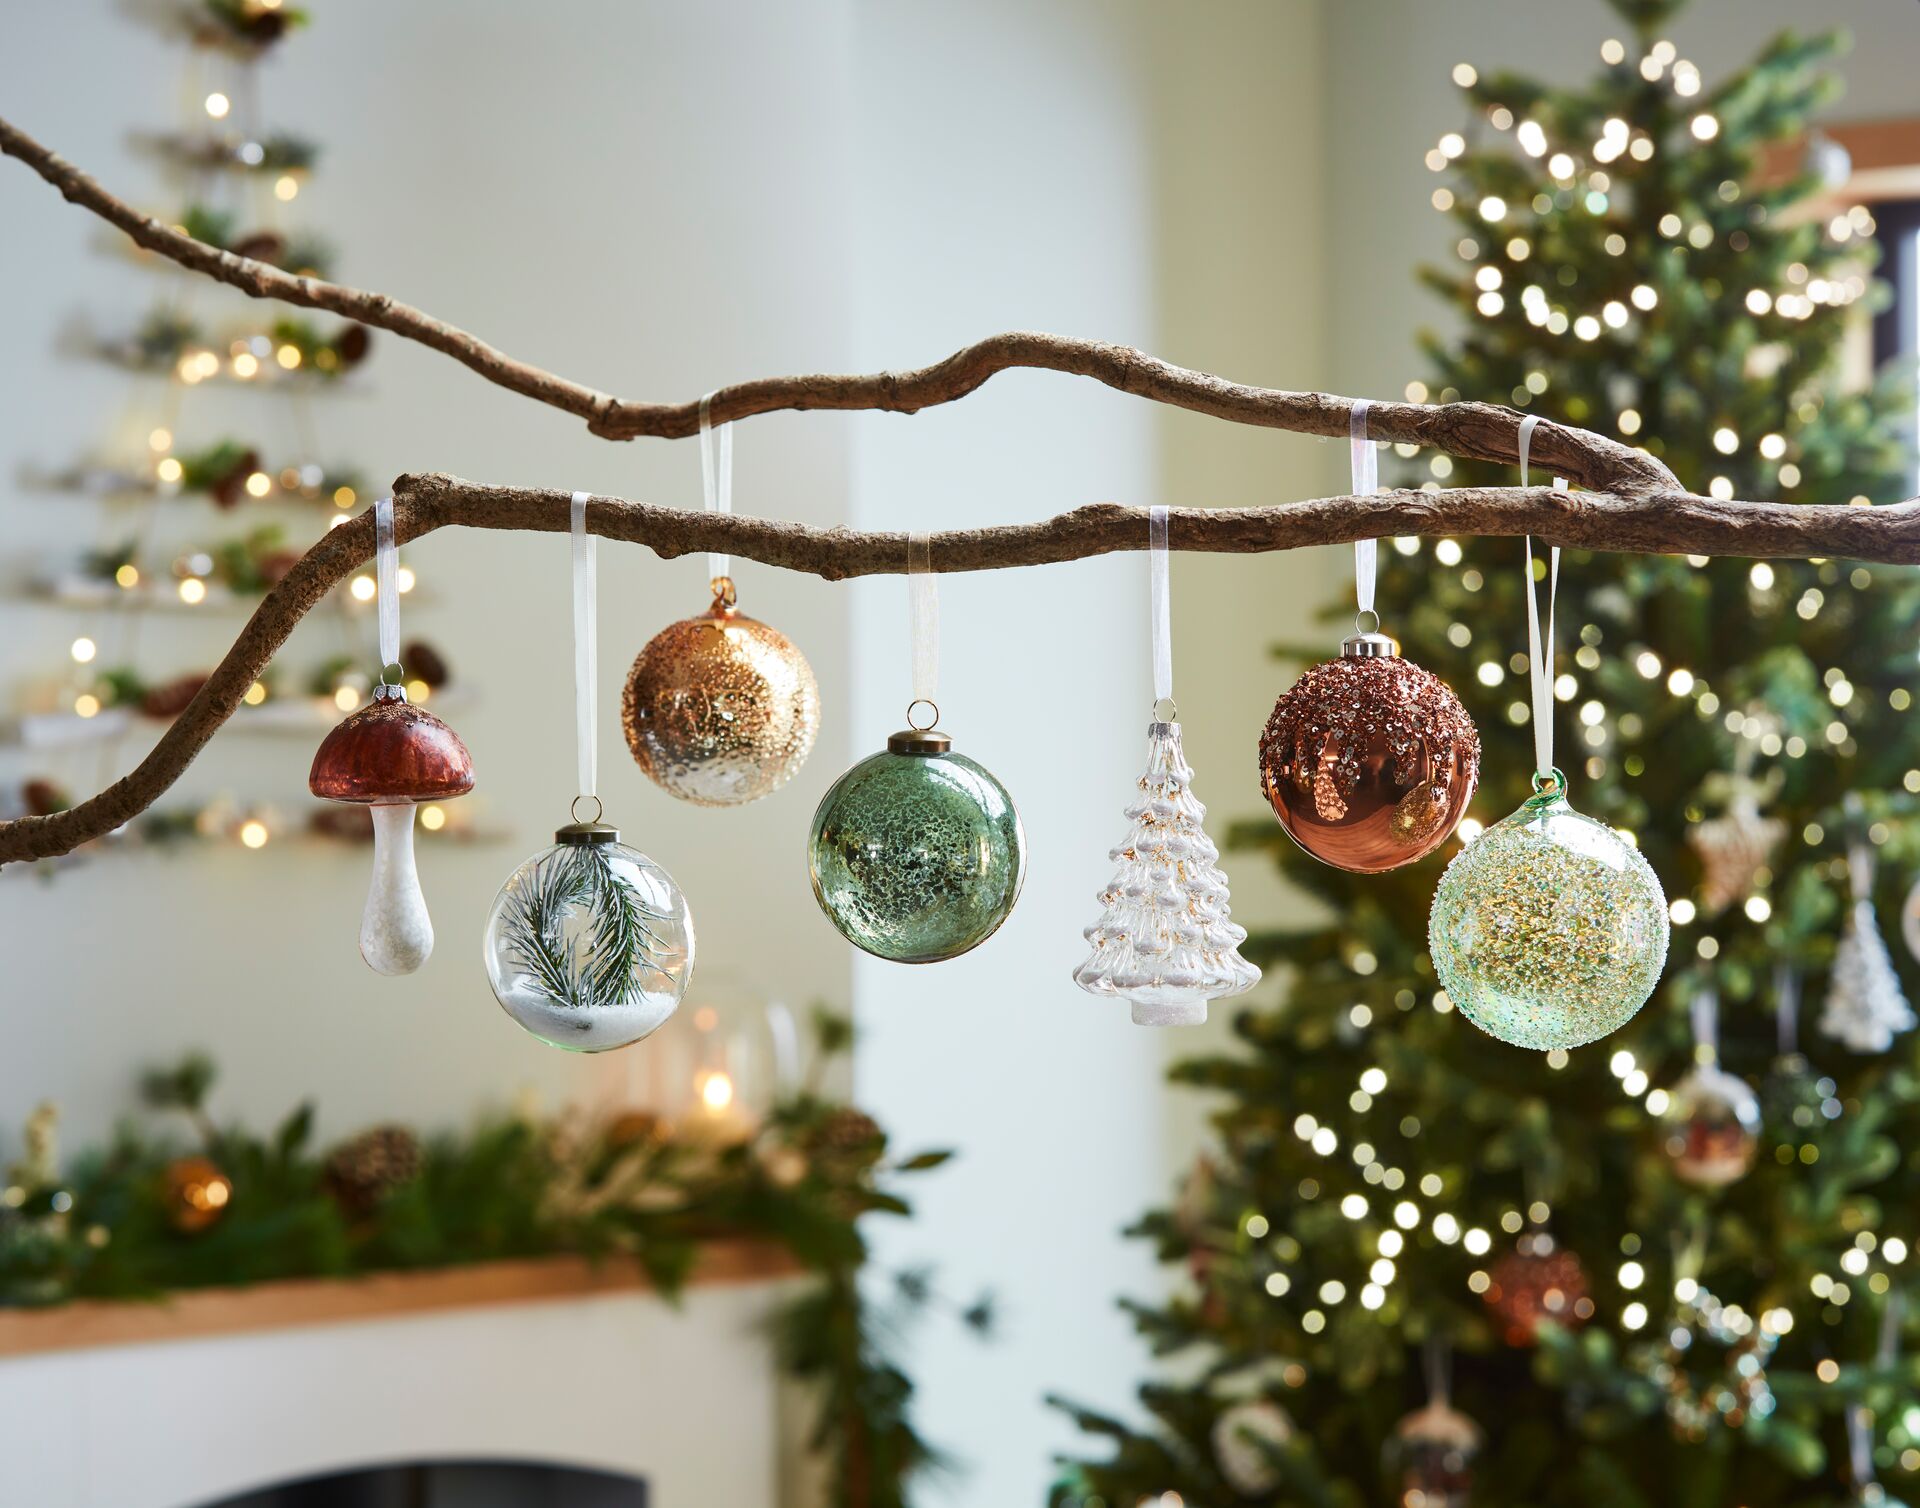 Photograph of tree branches decorated with Christmas baubles in front of a fireplace and Christmas tree